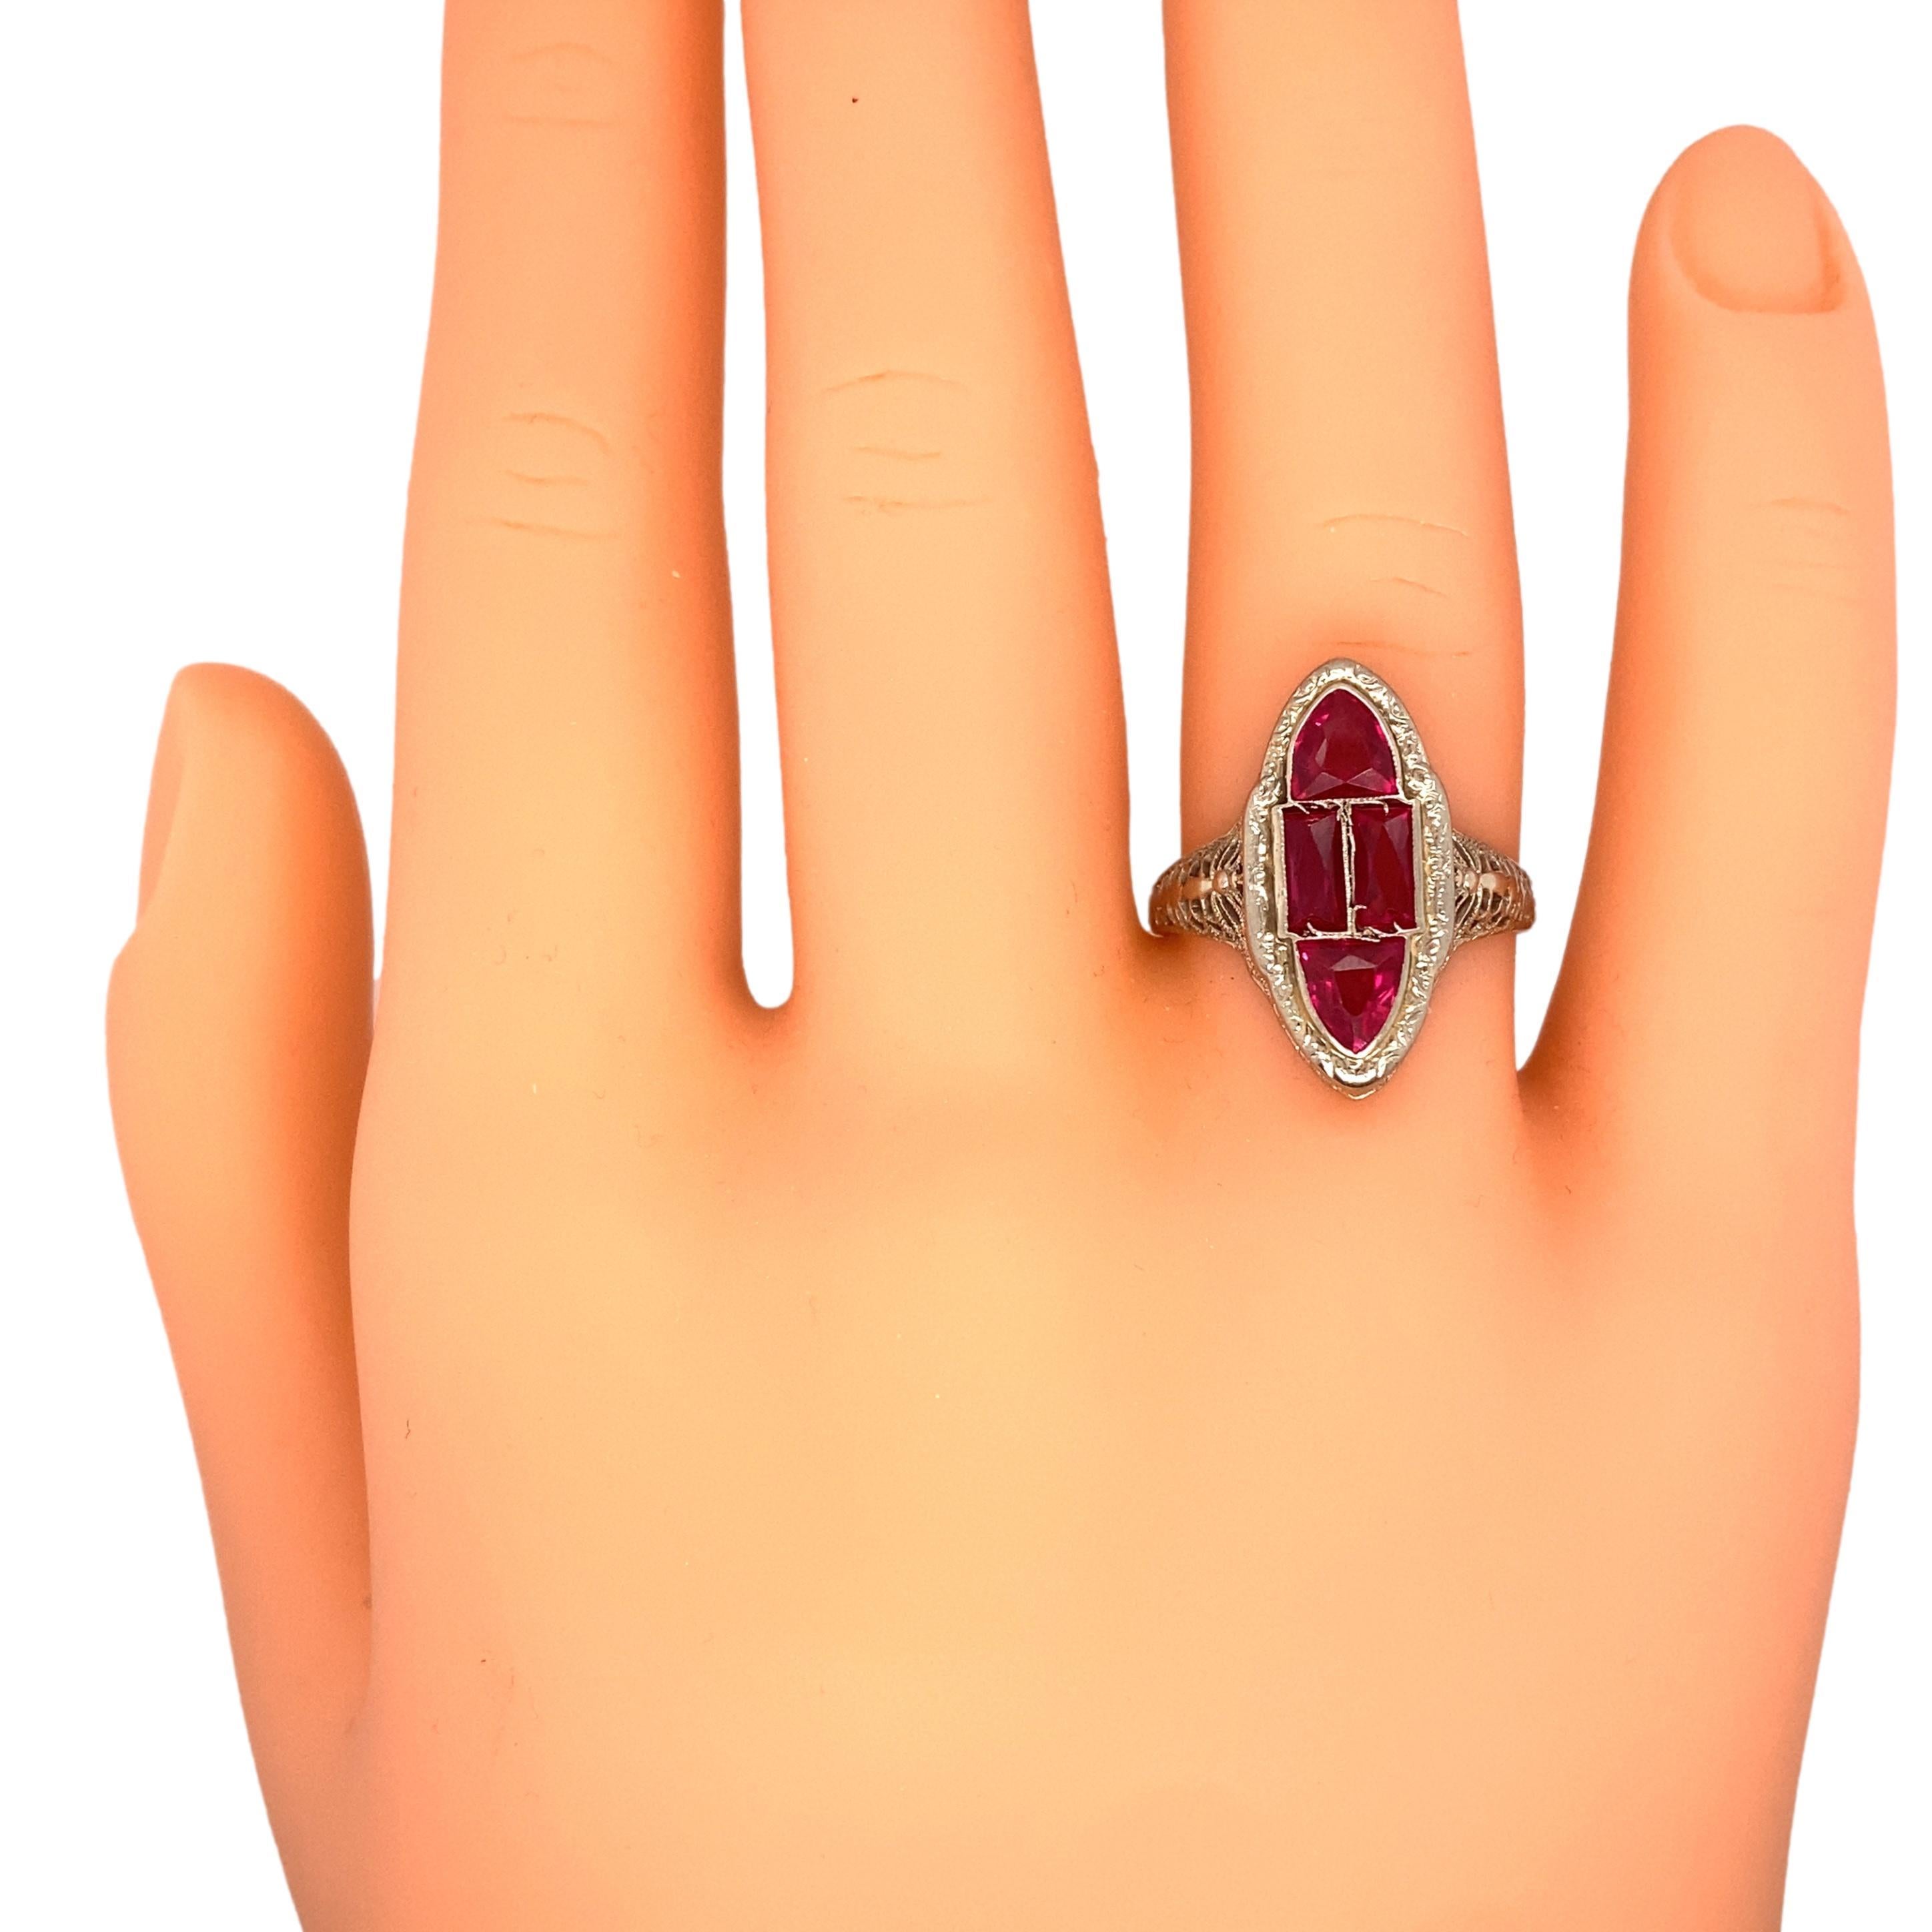 Circa 1920s Art Deco Simulated Ruby Cocktail Ring in 14 Karat White Gold For Sale 2